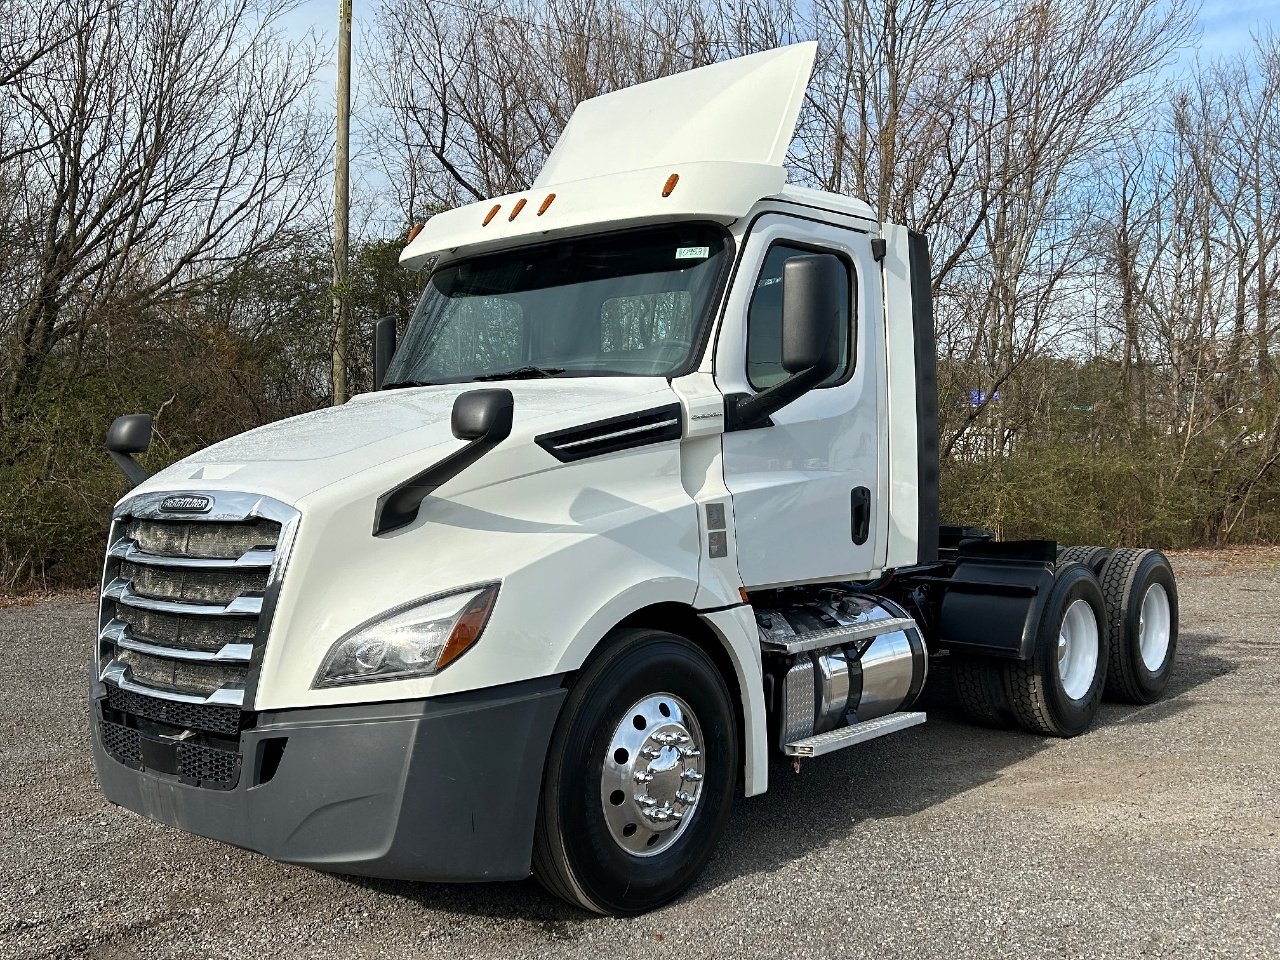 USED 2018 FREIGHTLINER CASCADIA TANDEM AXLE DAYCAB TRUCK #15166